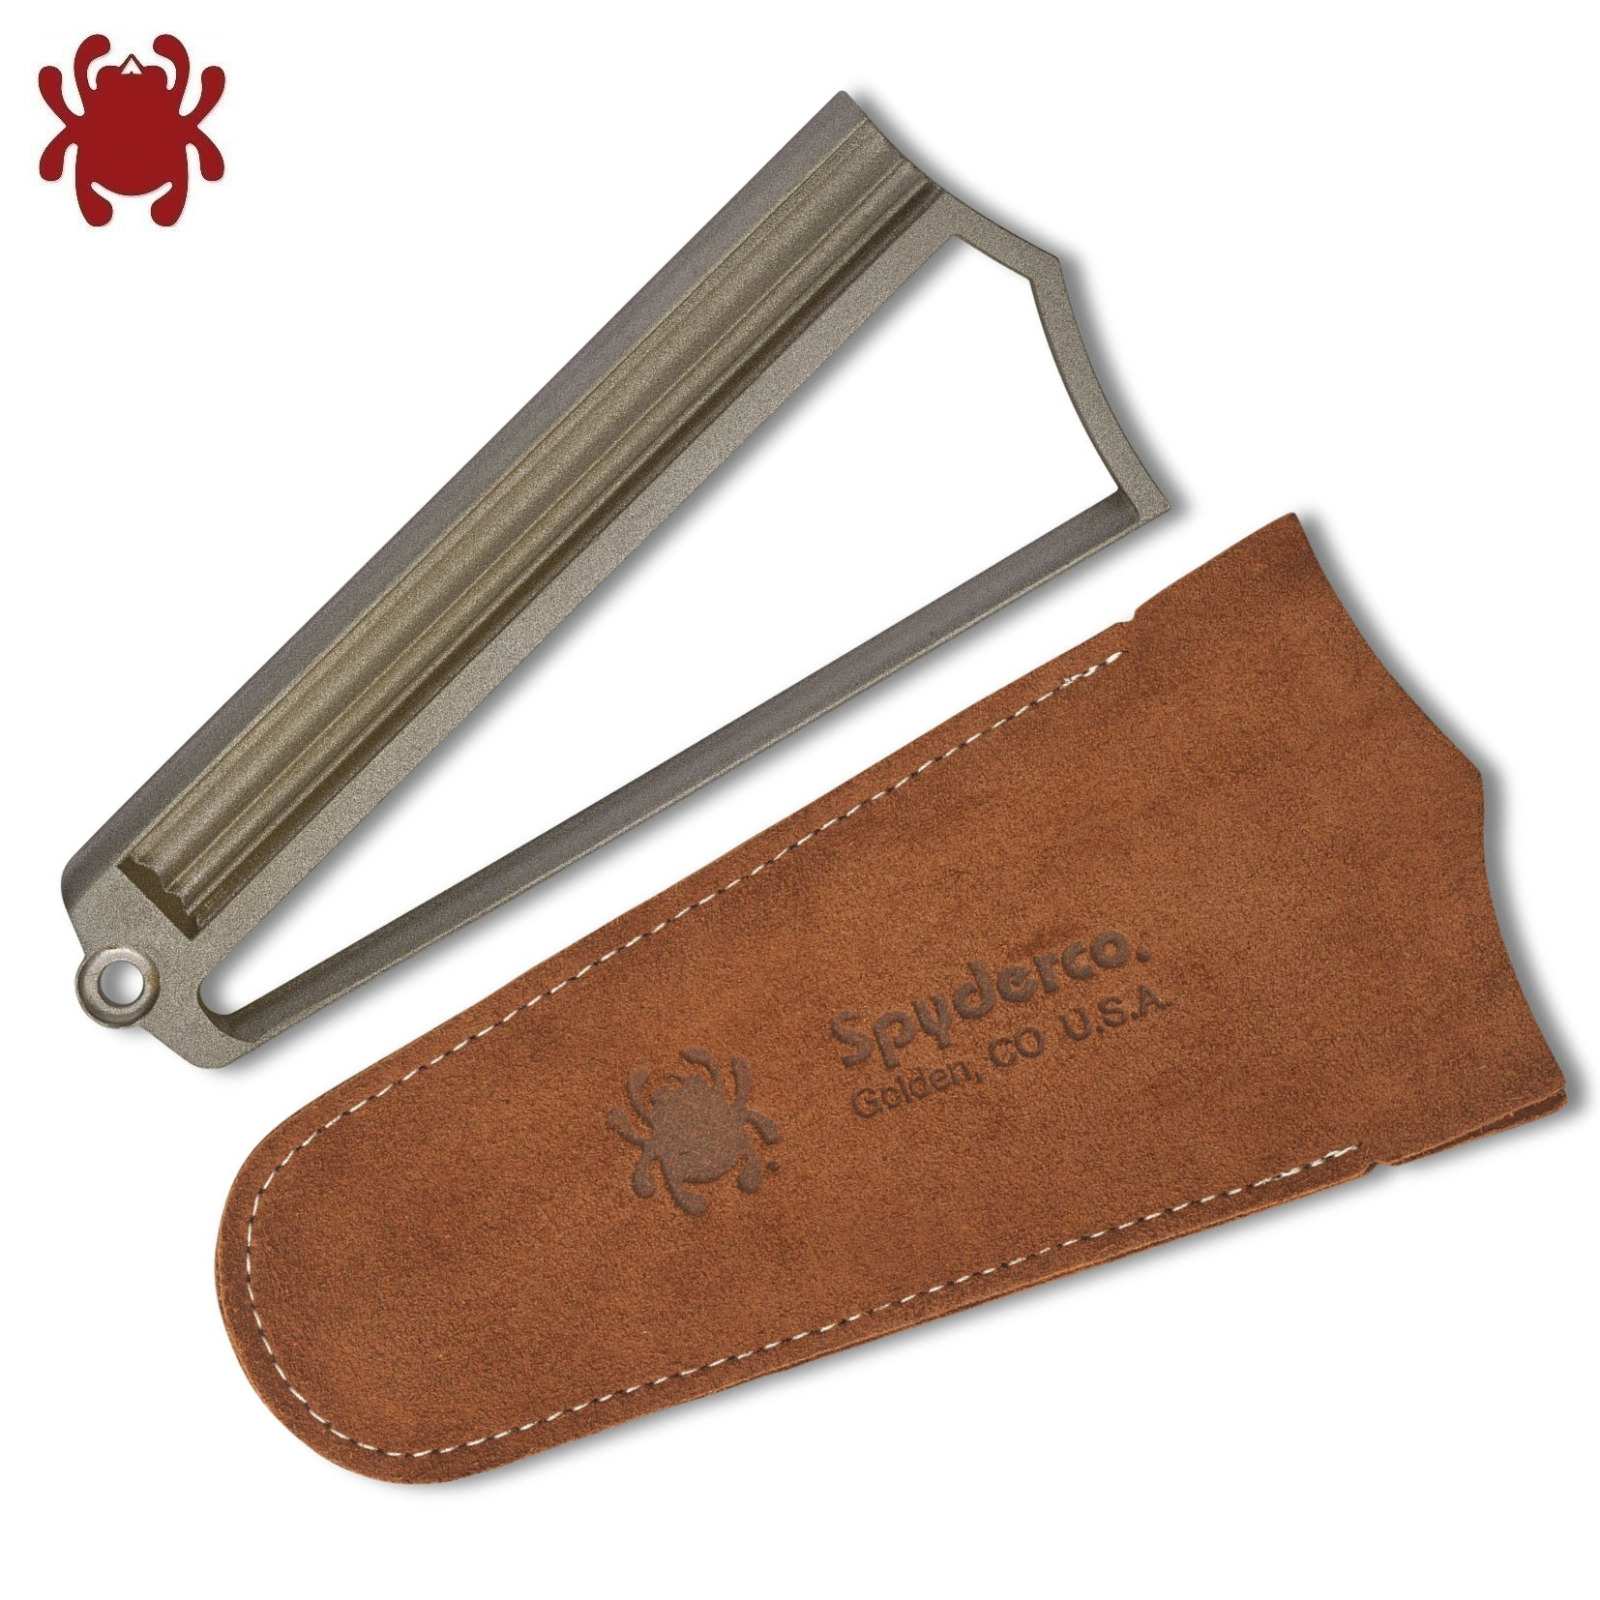 Spyderco Webfoot Sharpener with ABS Base, Suede Pouch 308CBN - Authorized Dealer